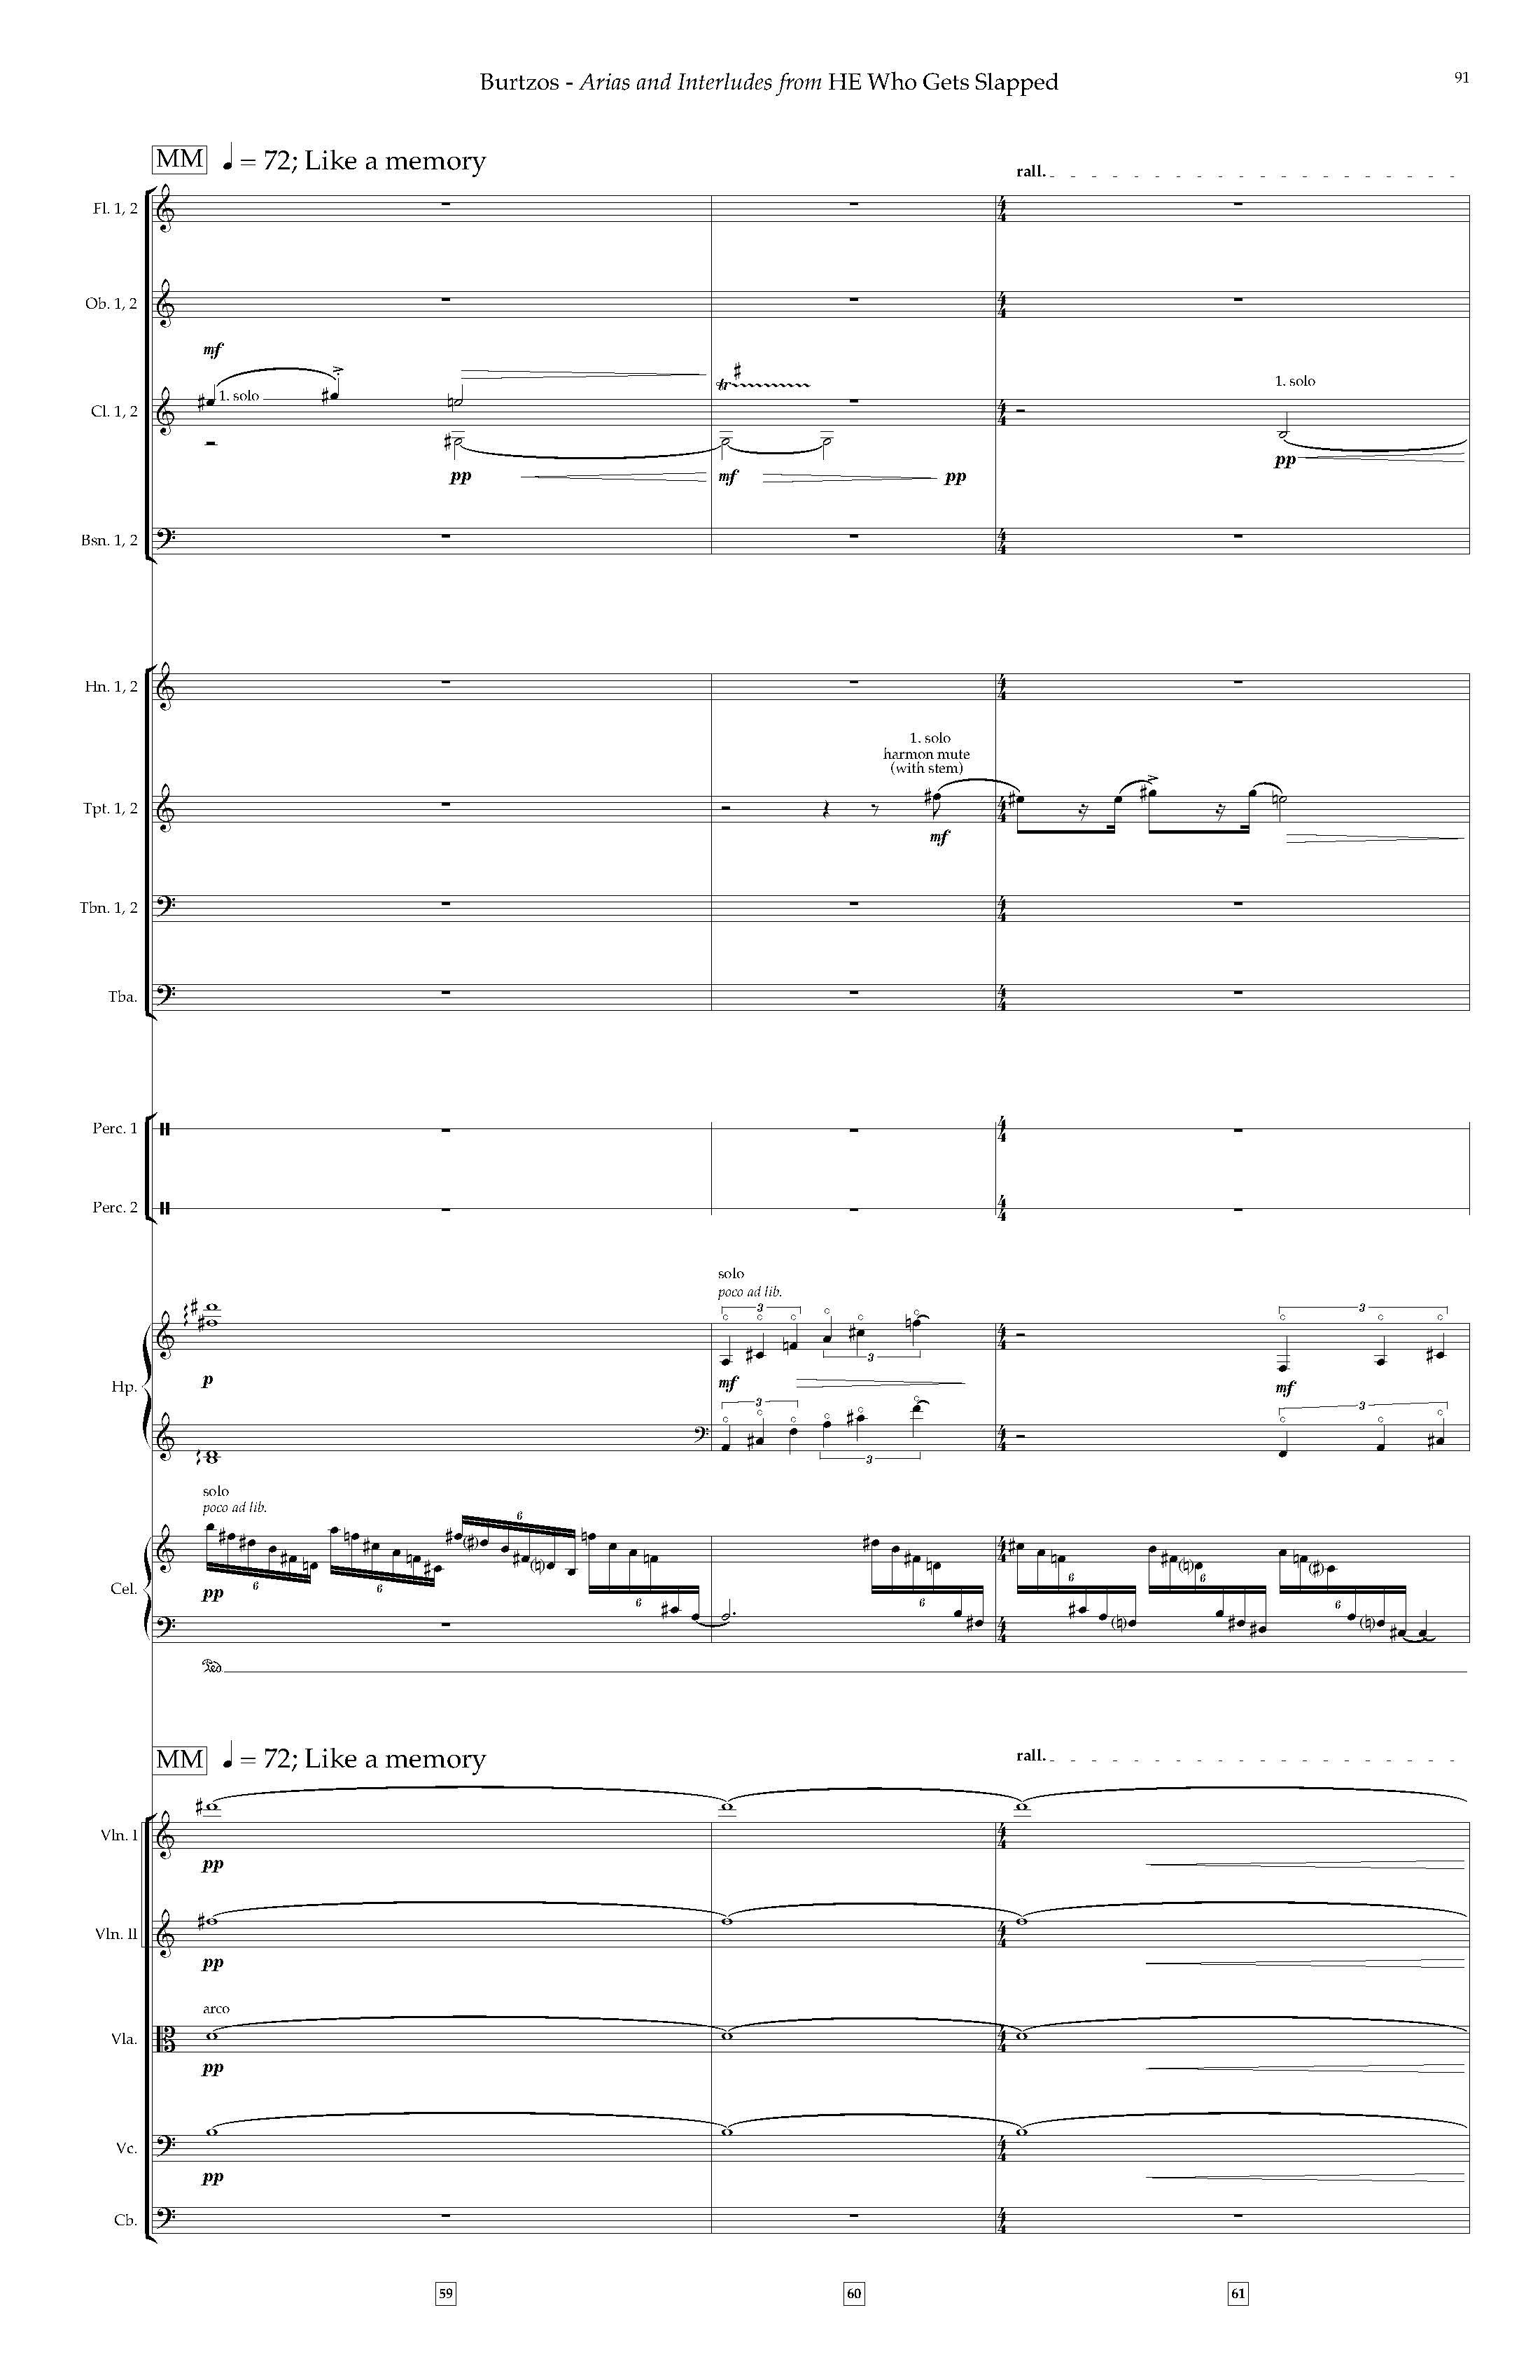 Arias and Interludes from HWGS - Complete Score_Page_97.jpg